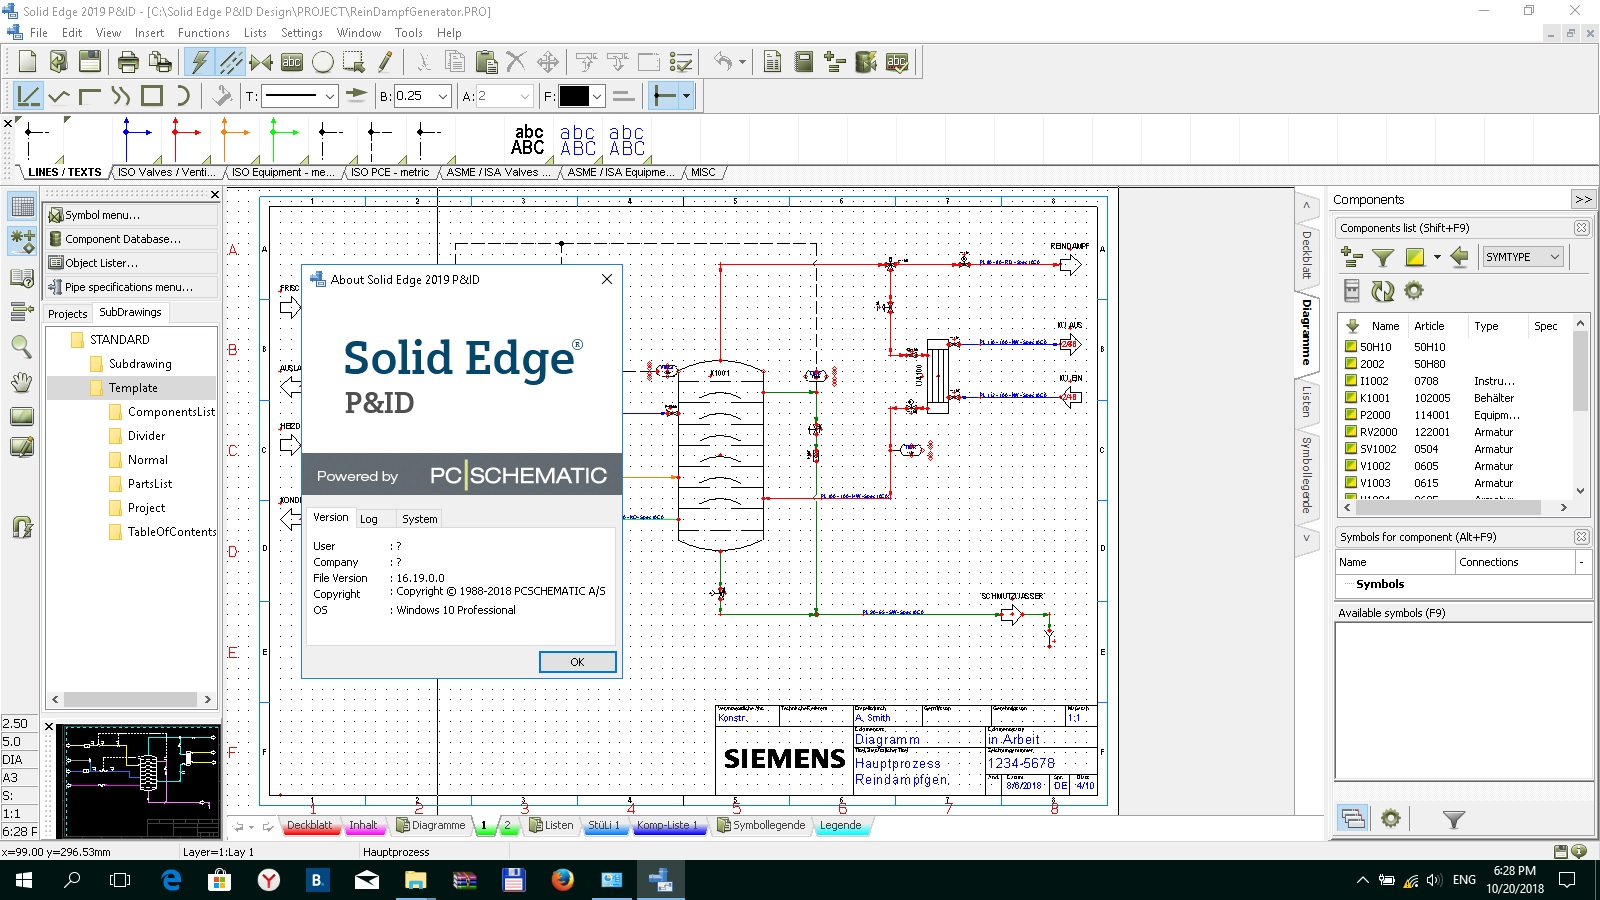 Working with Siemens Solid Edge Modular Plant Design 2019 full license